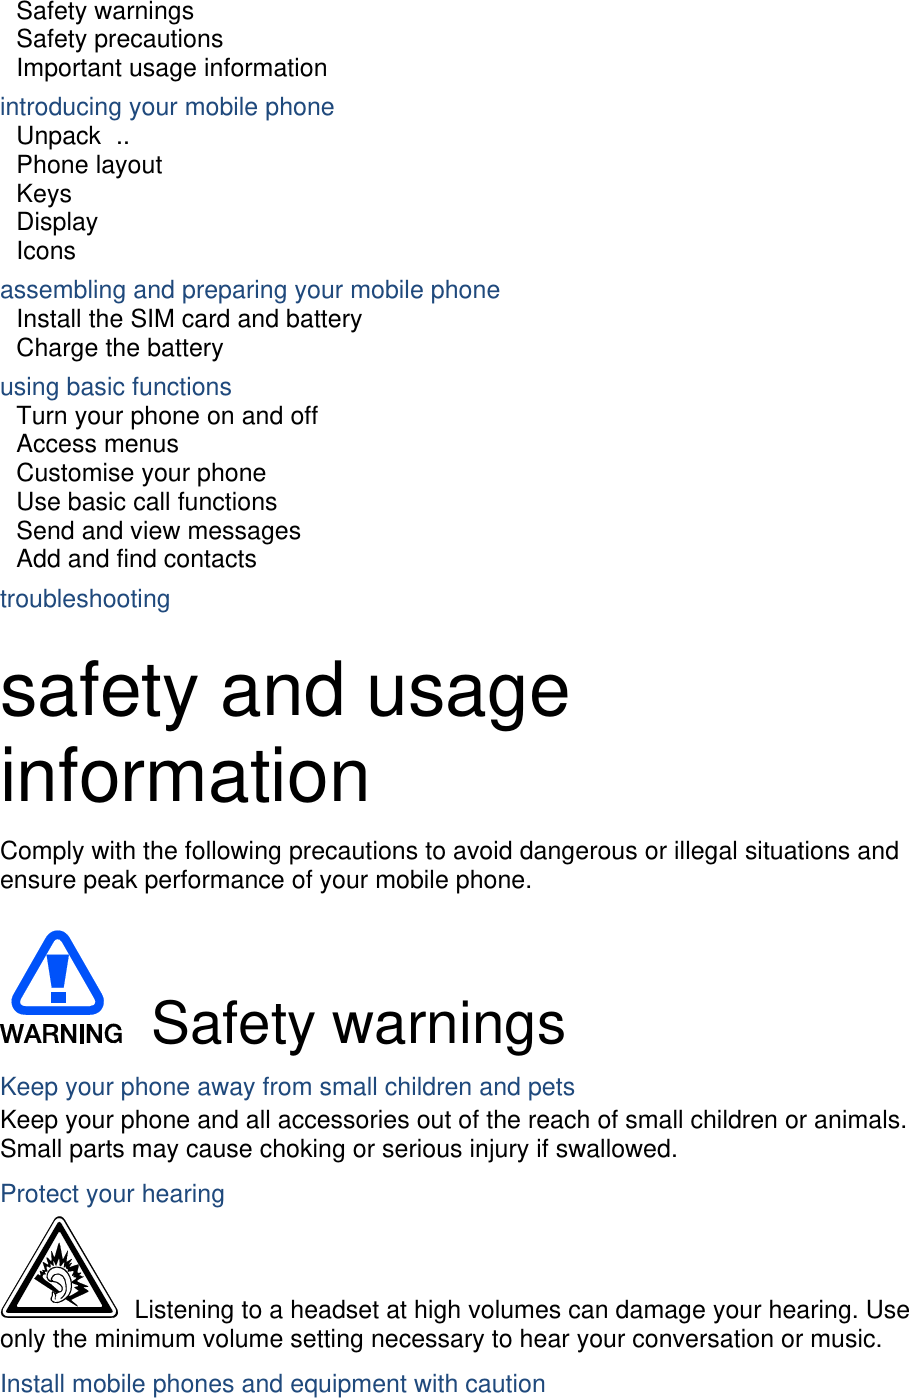 Safety warnings     Safety precautions     Important usage information     introducing your mobile phone     Unpack ..  Phone layout     Keys  Display  Icons assembling and preparing your mobile phone     Install the SIM card and battery     Charge the battery     using basic functions    Turn your phone on and off    Access menus     Customise your phone     Use basic call functions     Send and view messages     Add and find contacts     troubleshooting     safety and usage information  Comply with the following precautions to avoid dangerous or illegal situations and ensure peak performance of your mobile phone.   Safety warnings Keep your phone away from small children and pets Keep your phone and all accessories out of the reach of small children or animals. Small parts may cause choking or serious injury if swallowed. Protect your hearing   Listening to a headset at high volumes can damage your hearing. Use only the minimum volume setting necessary to hear your conversation or music. Install mobile phones and equipment with caution 